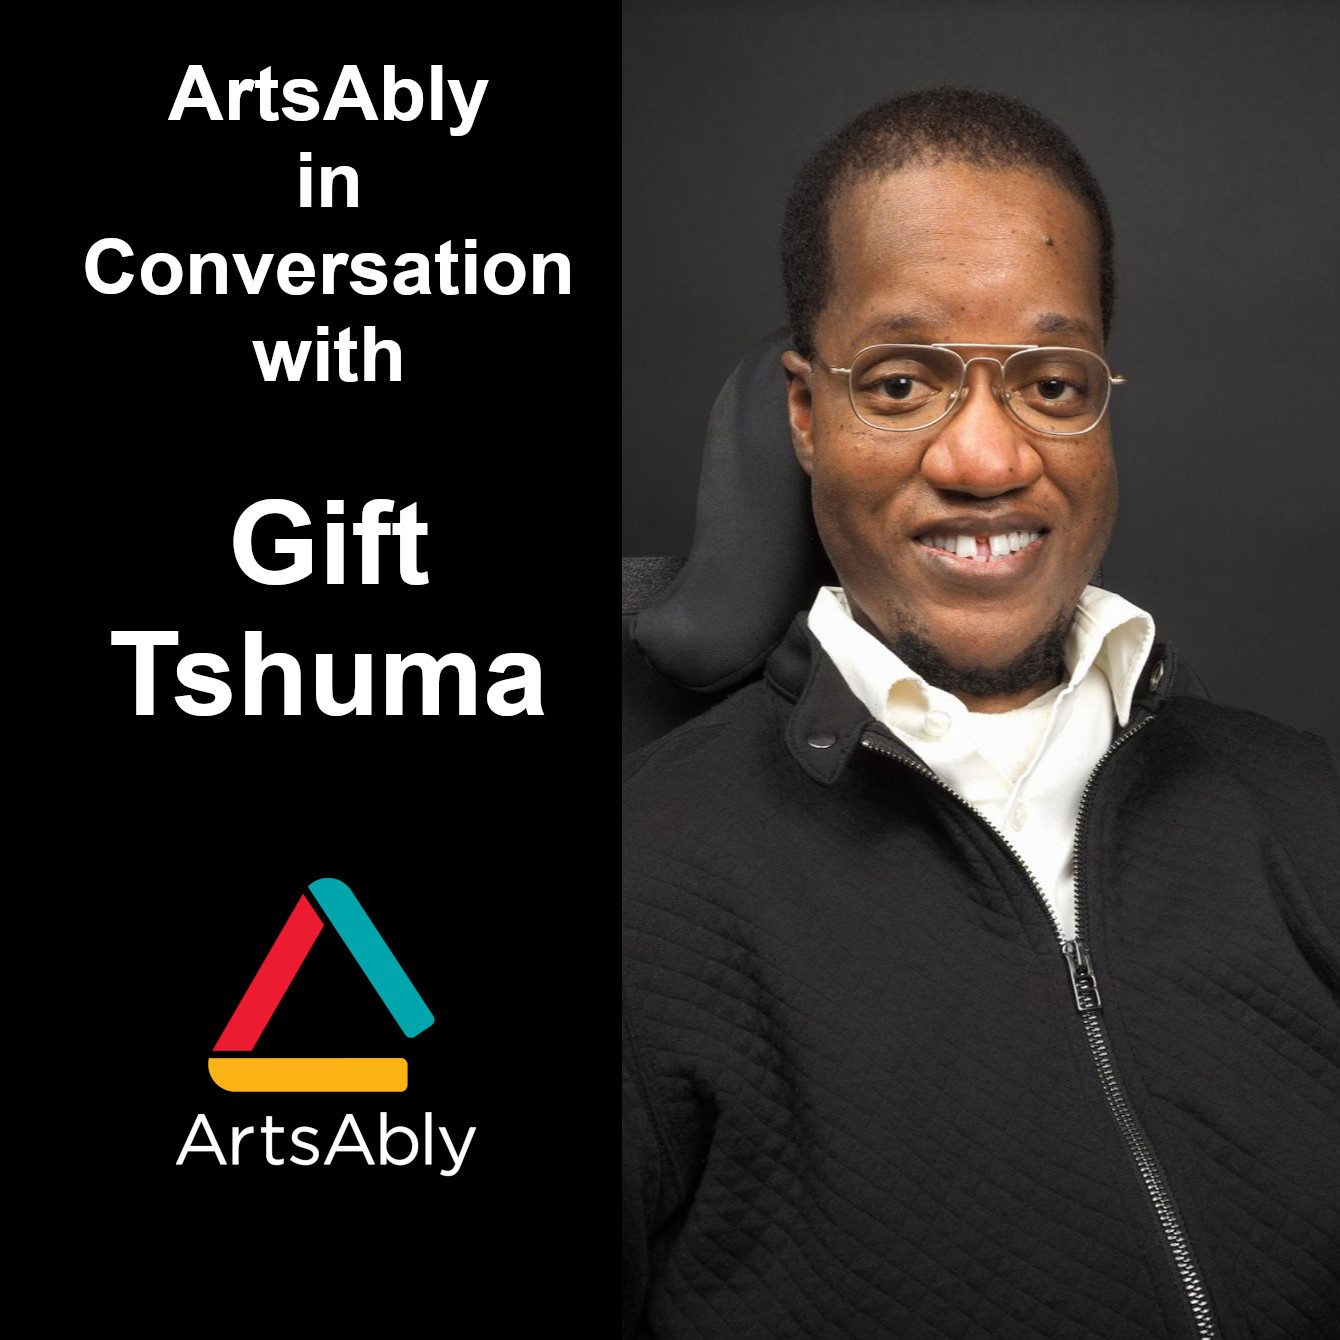 Episode 20: ArtsAbly in Conversation with Gift Tshuma